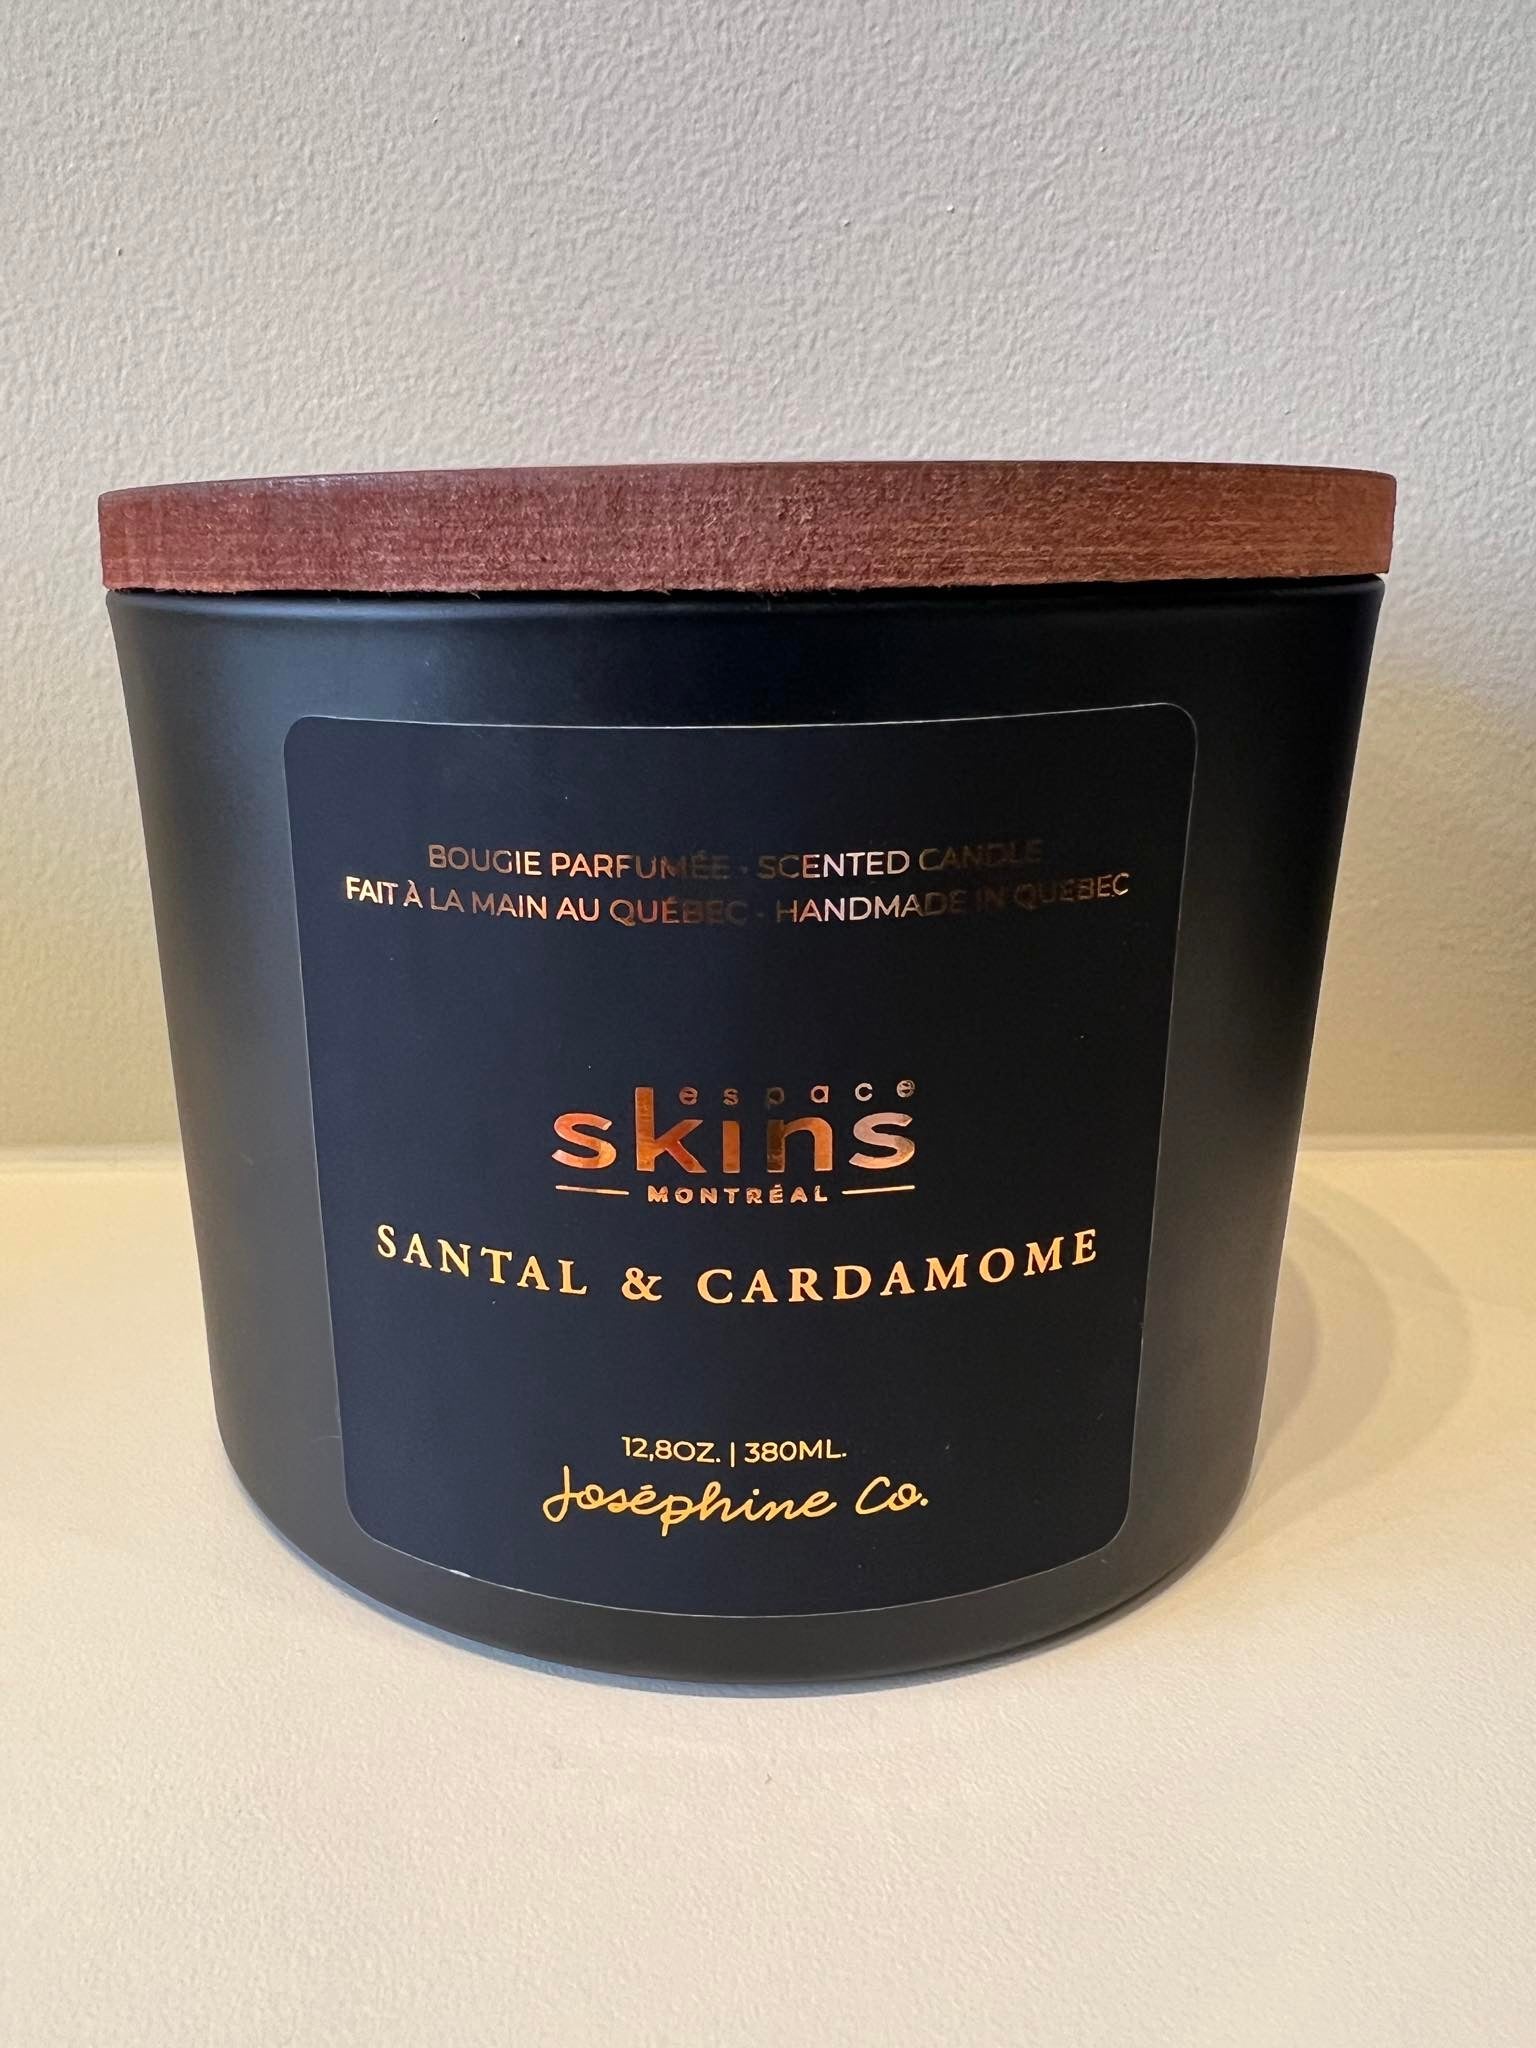 Espace Skins Candle collection - Espace Skins Montreal